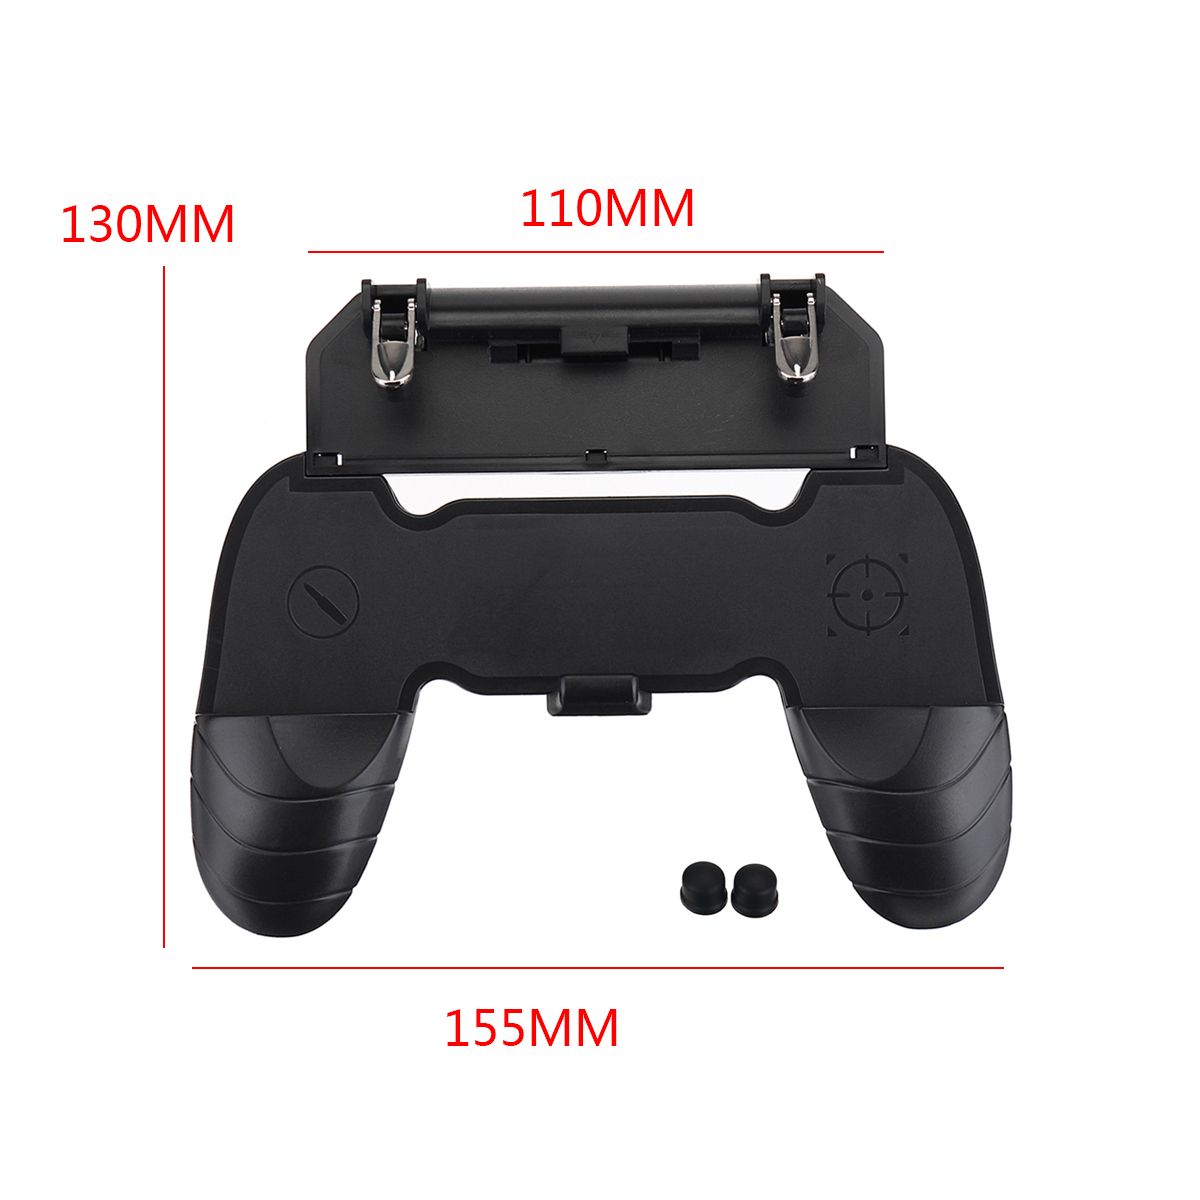 W18-Joystick-Shooter-Button-Fire-Trigger-Gamepad-Game-Controller-for-iOS-Android-PUBG-Games-1660470